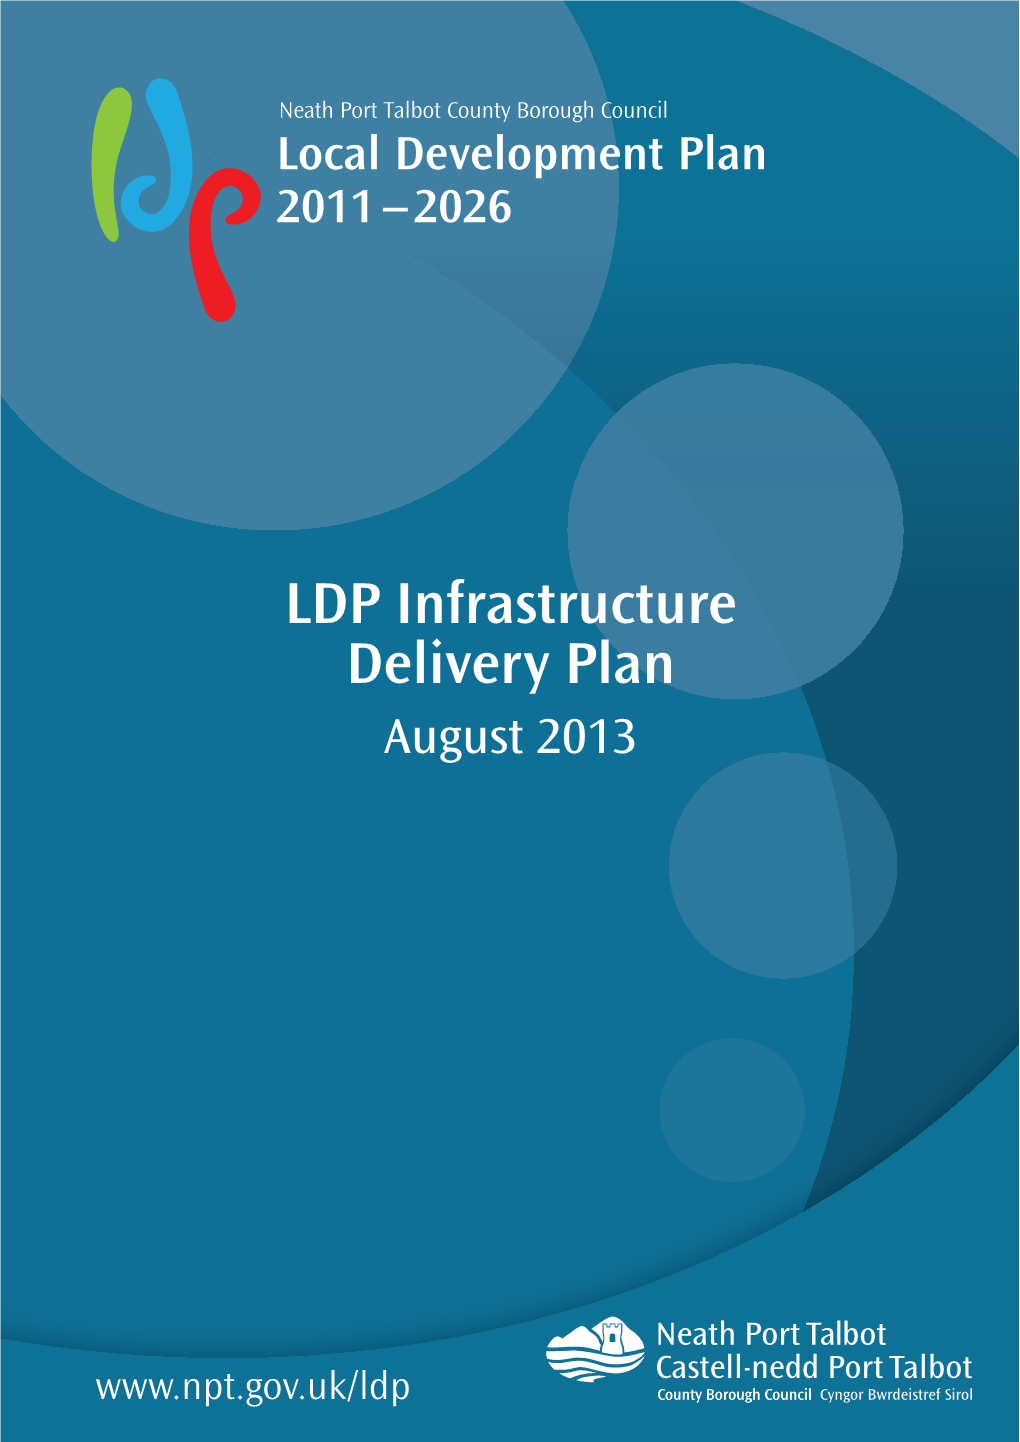 LDP Infrastructure Delivery Plan August 2013